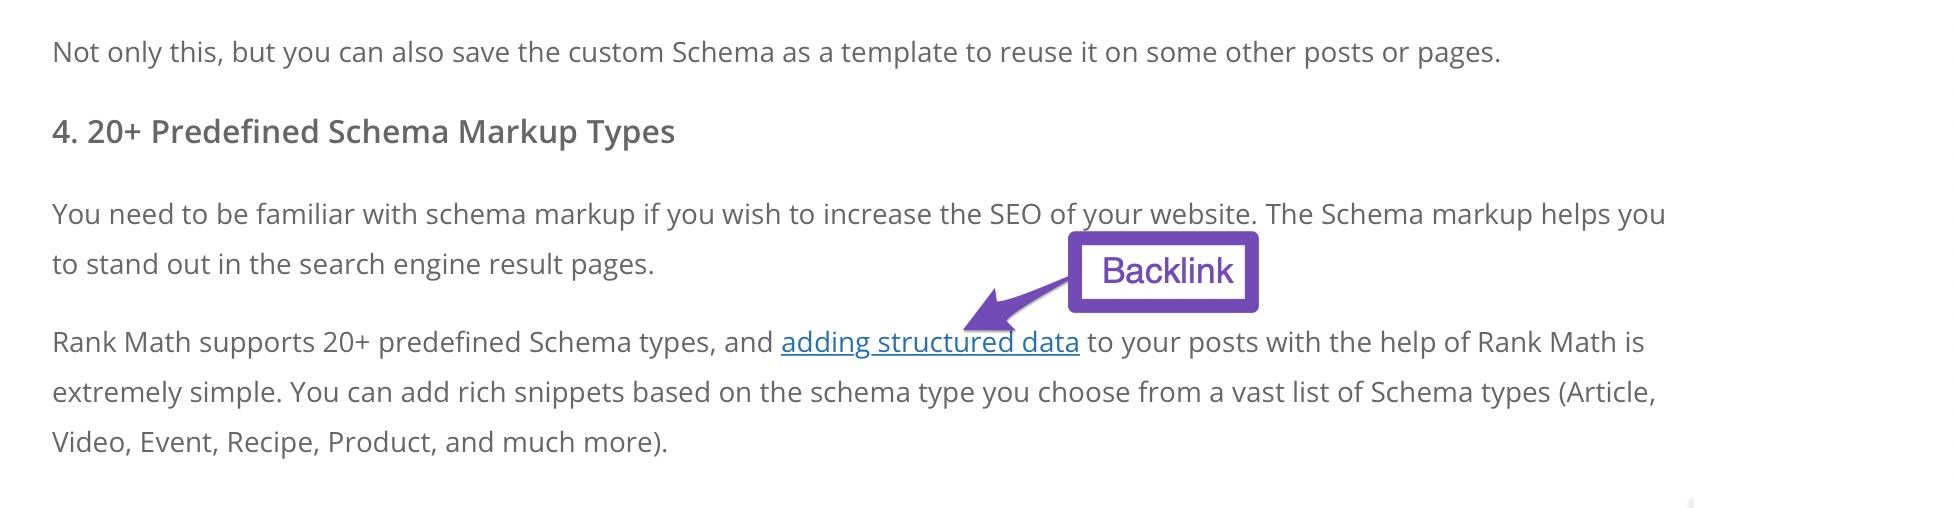 Example of Backlink